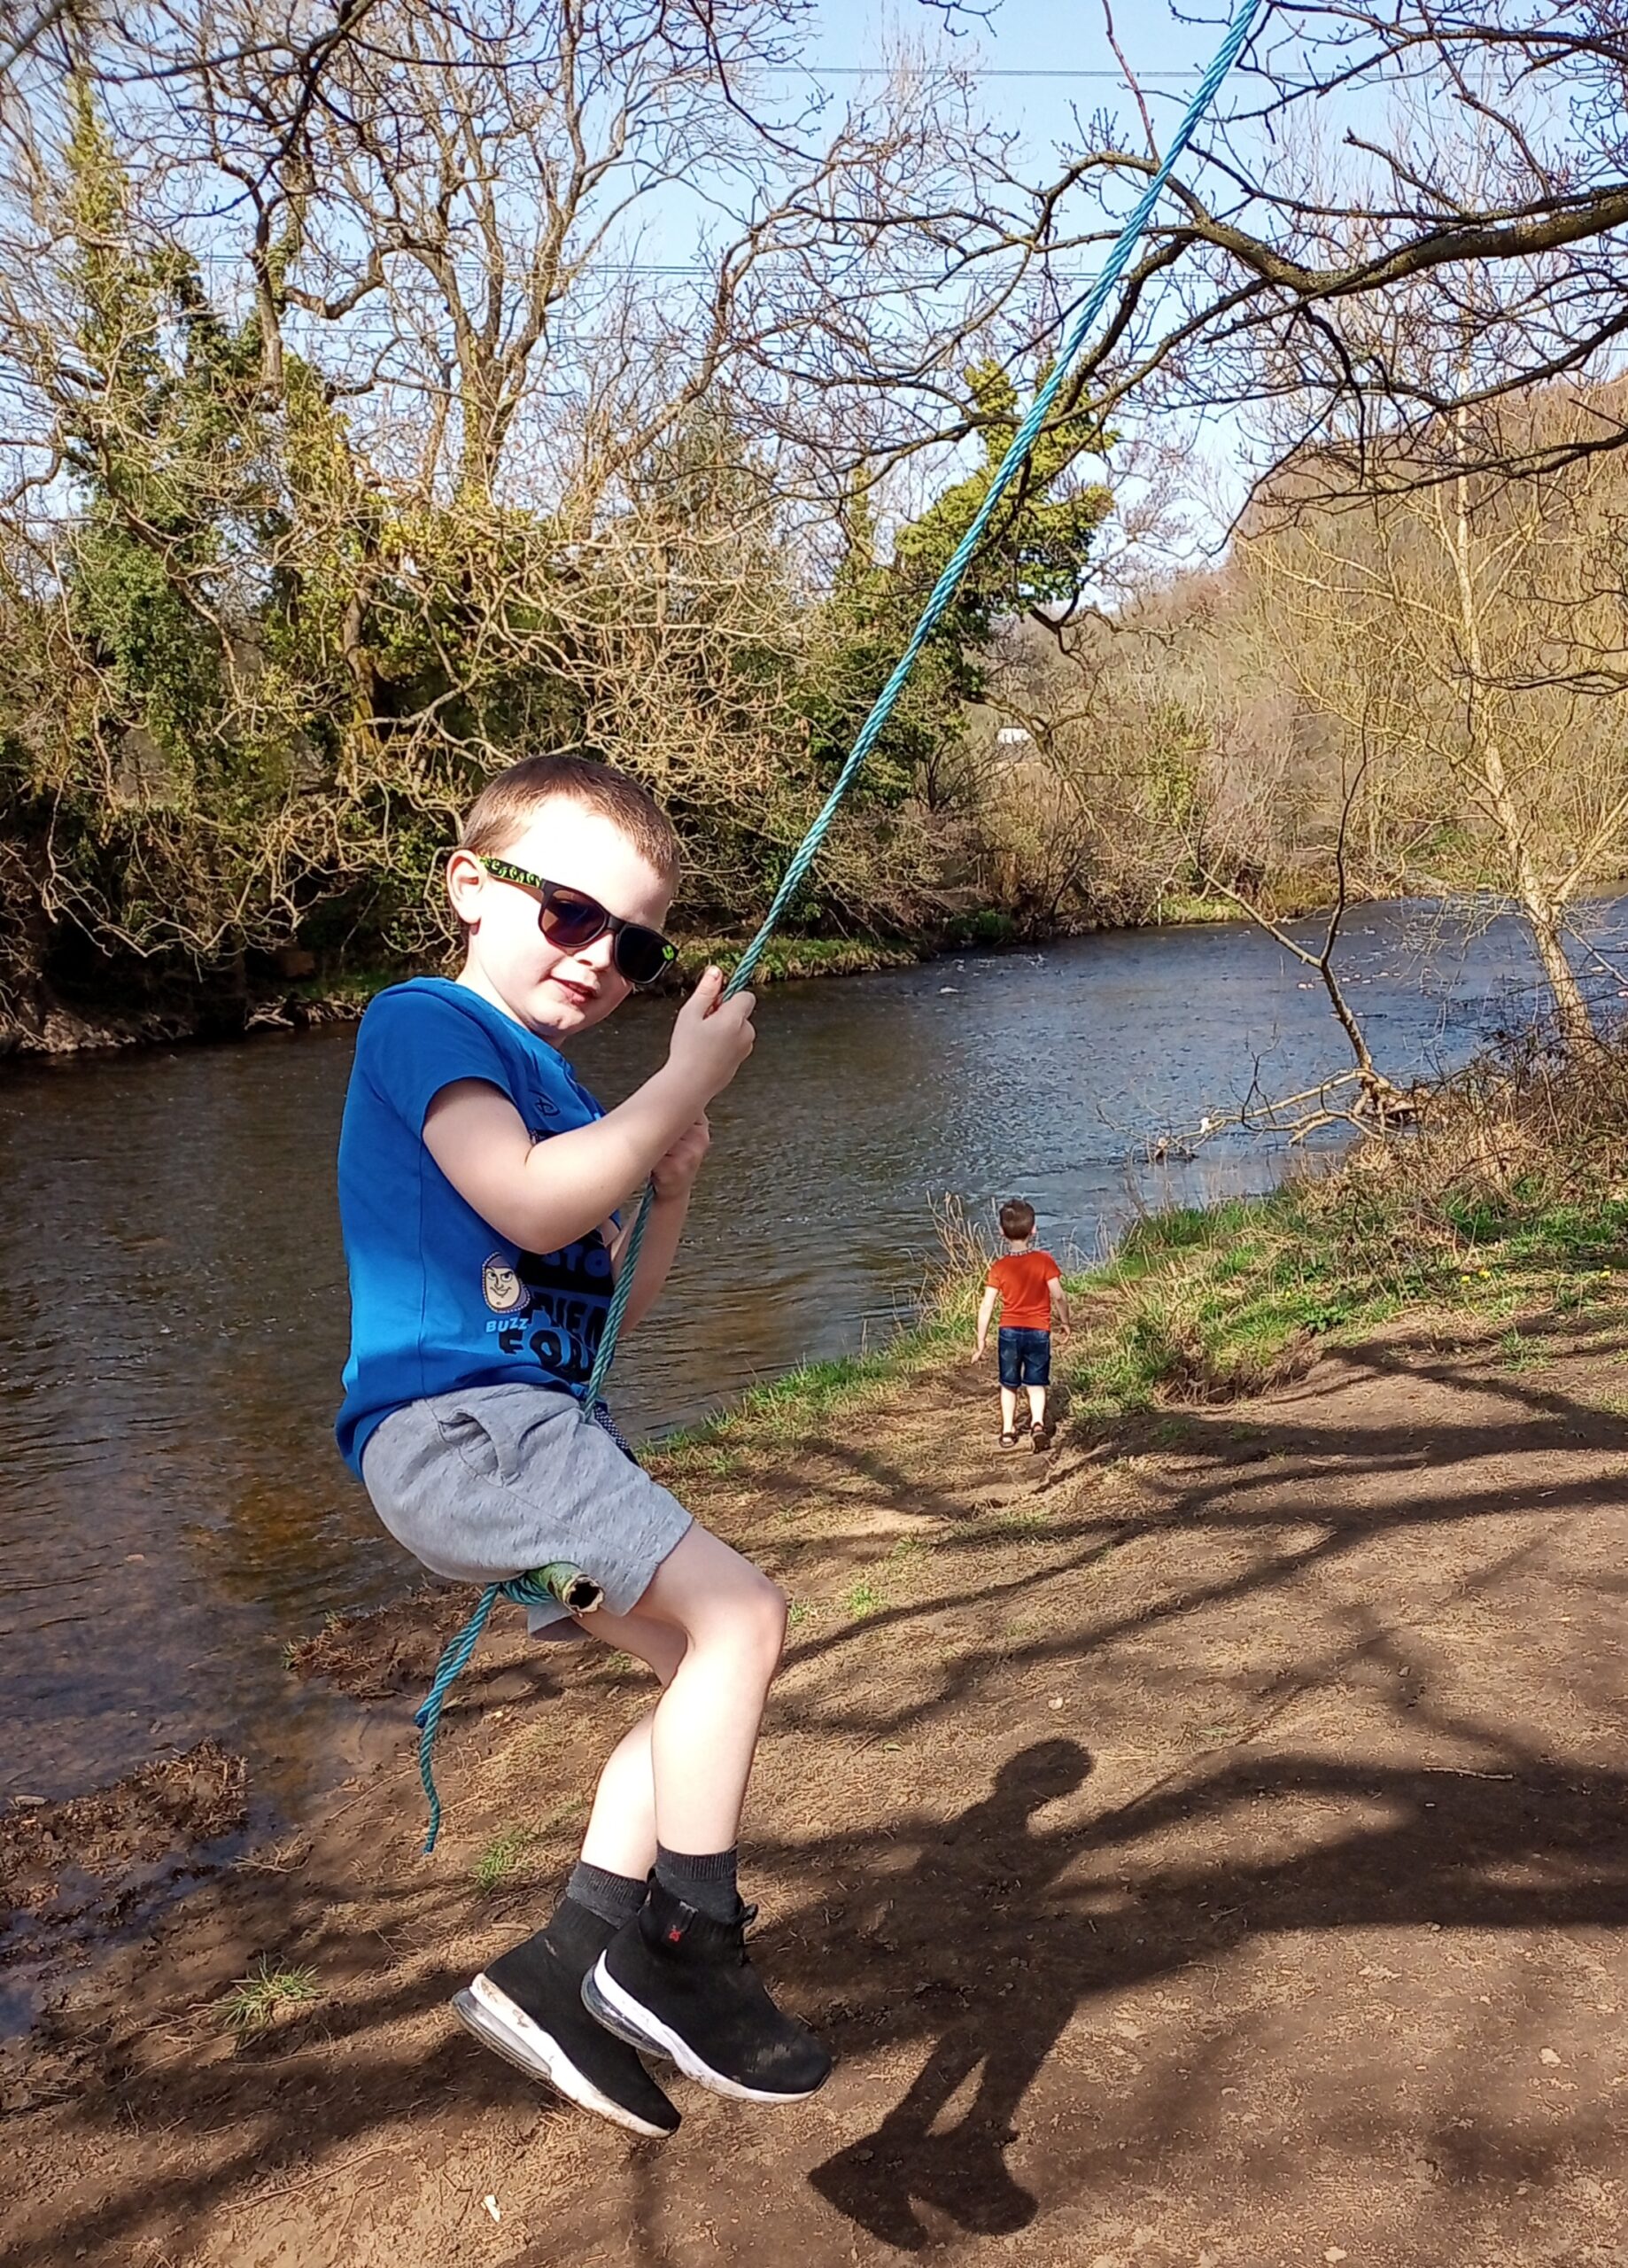 Grayson enjoys a rope swing by a lake. He is wearing dark glasses.